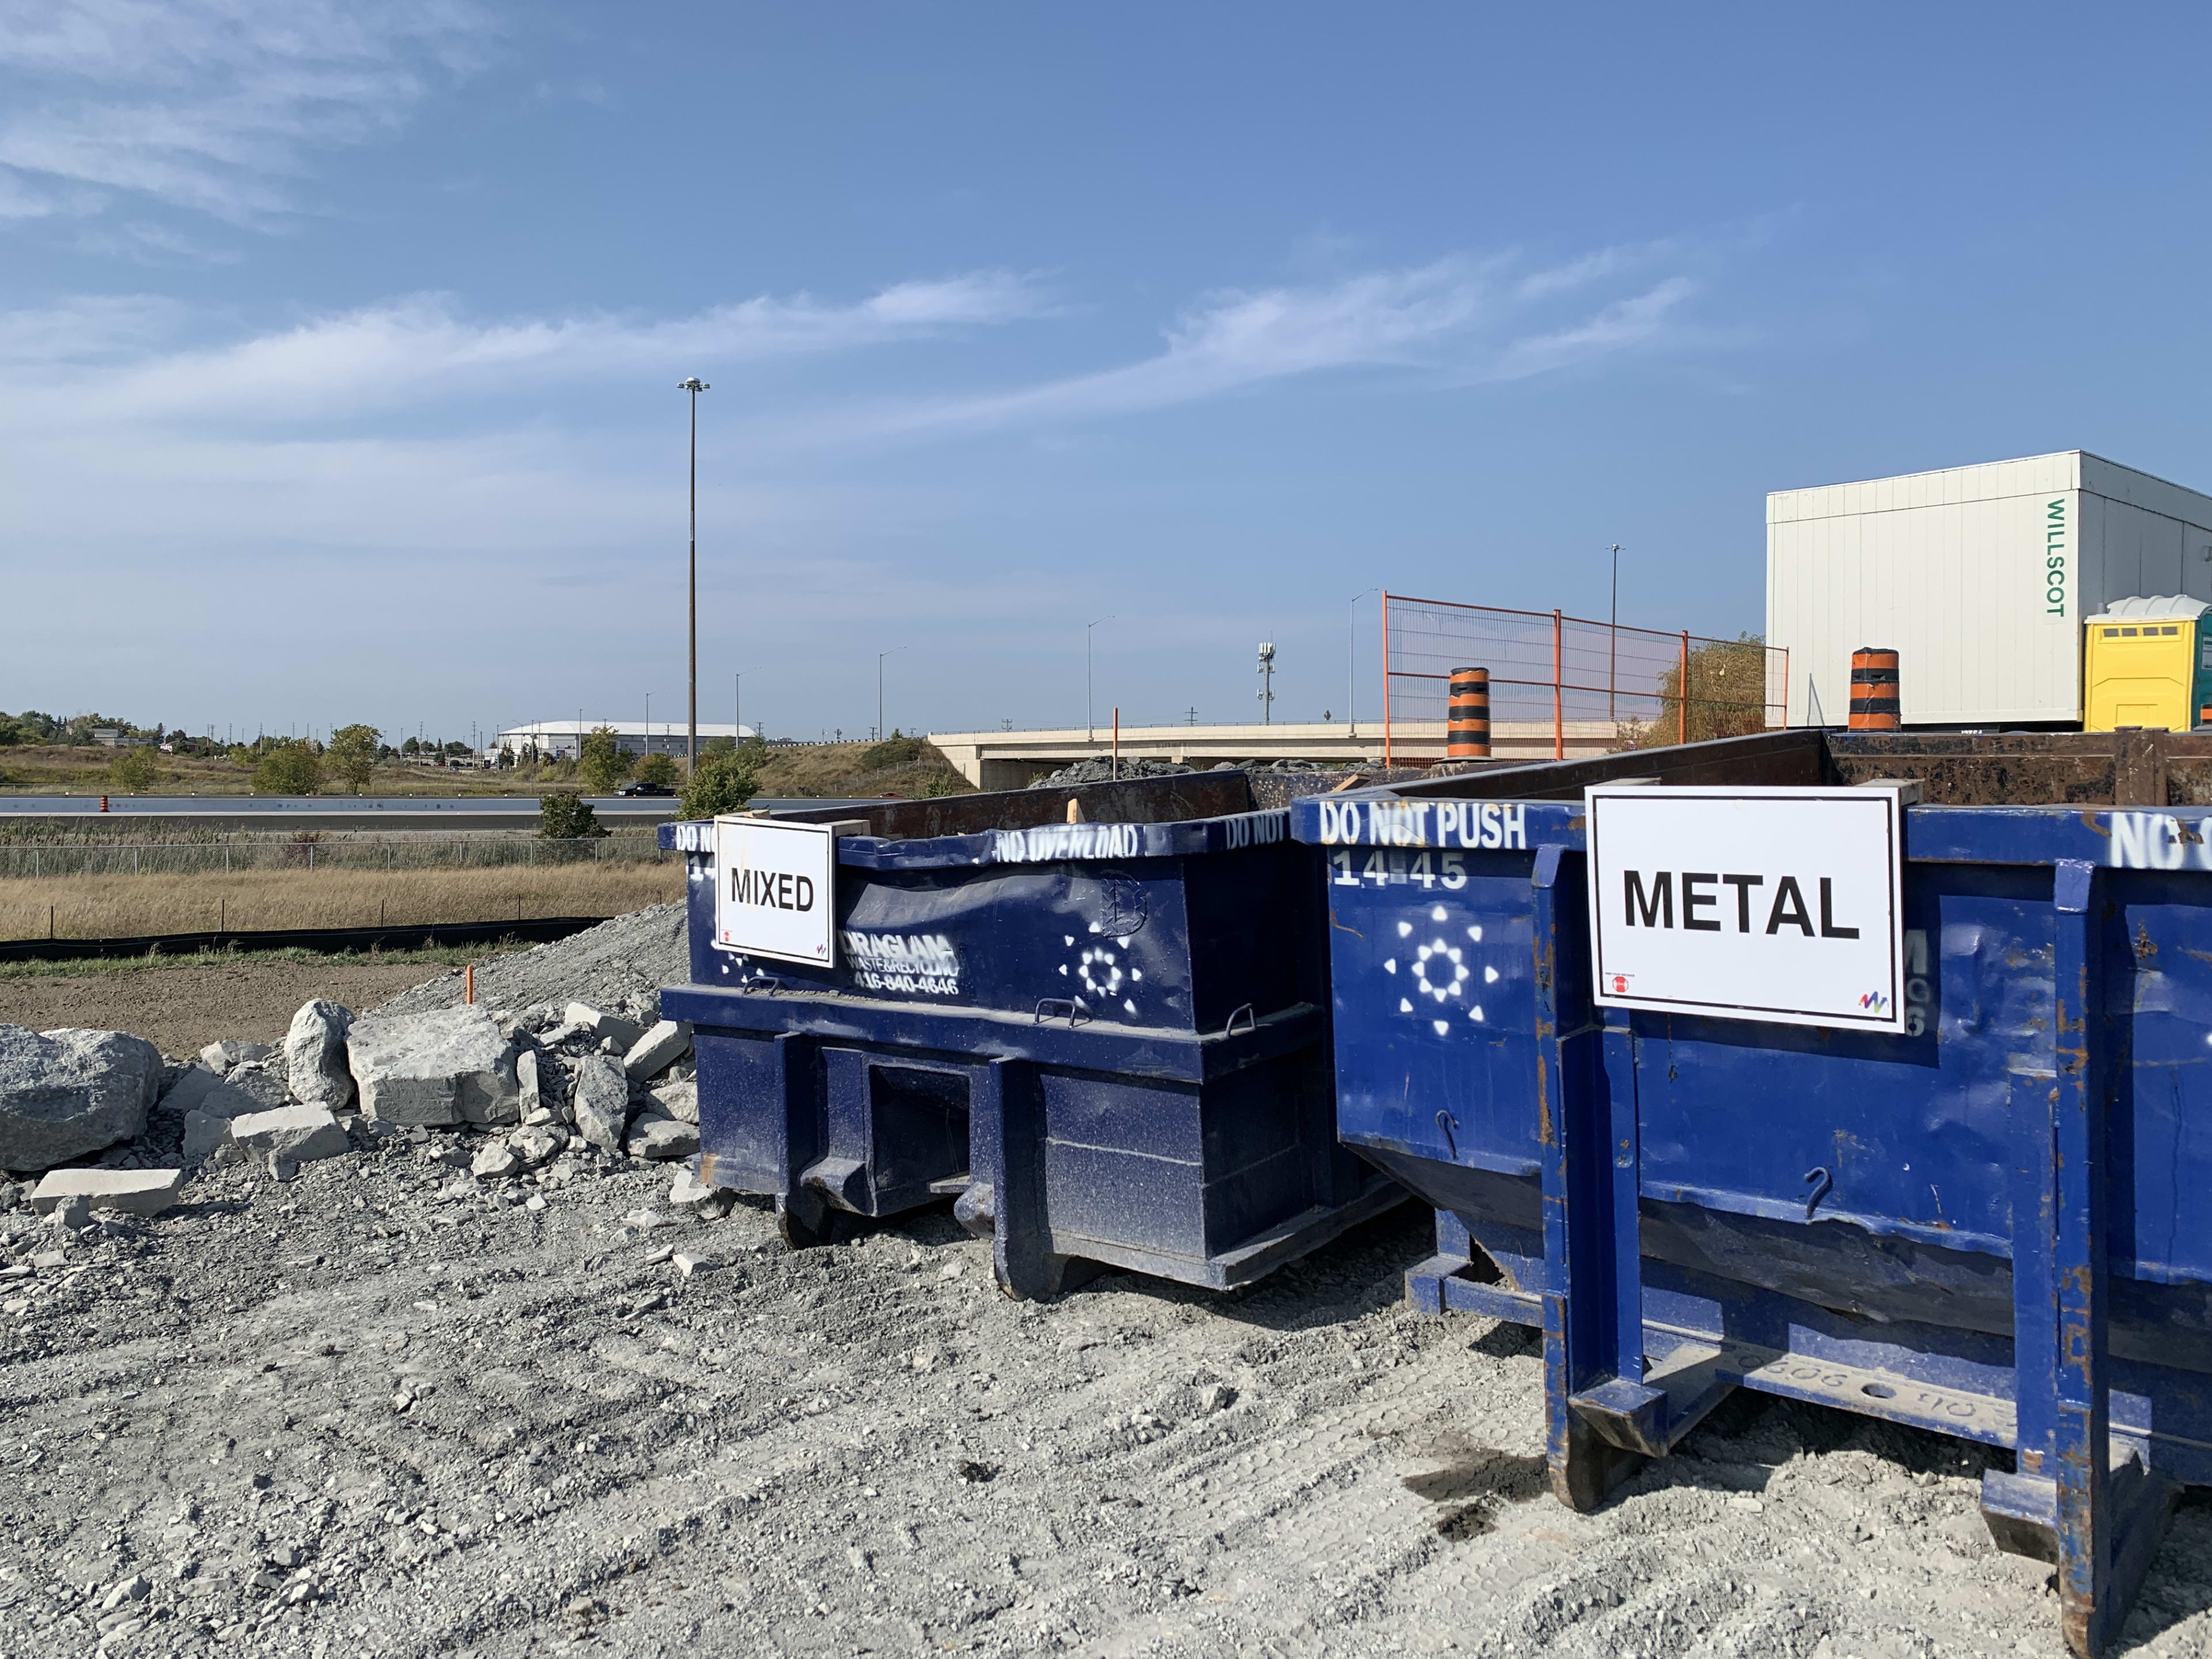 Two bins sits next to one another - one for mixed debris and one for metal.